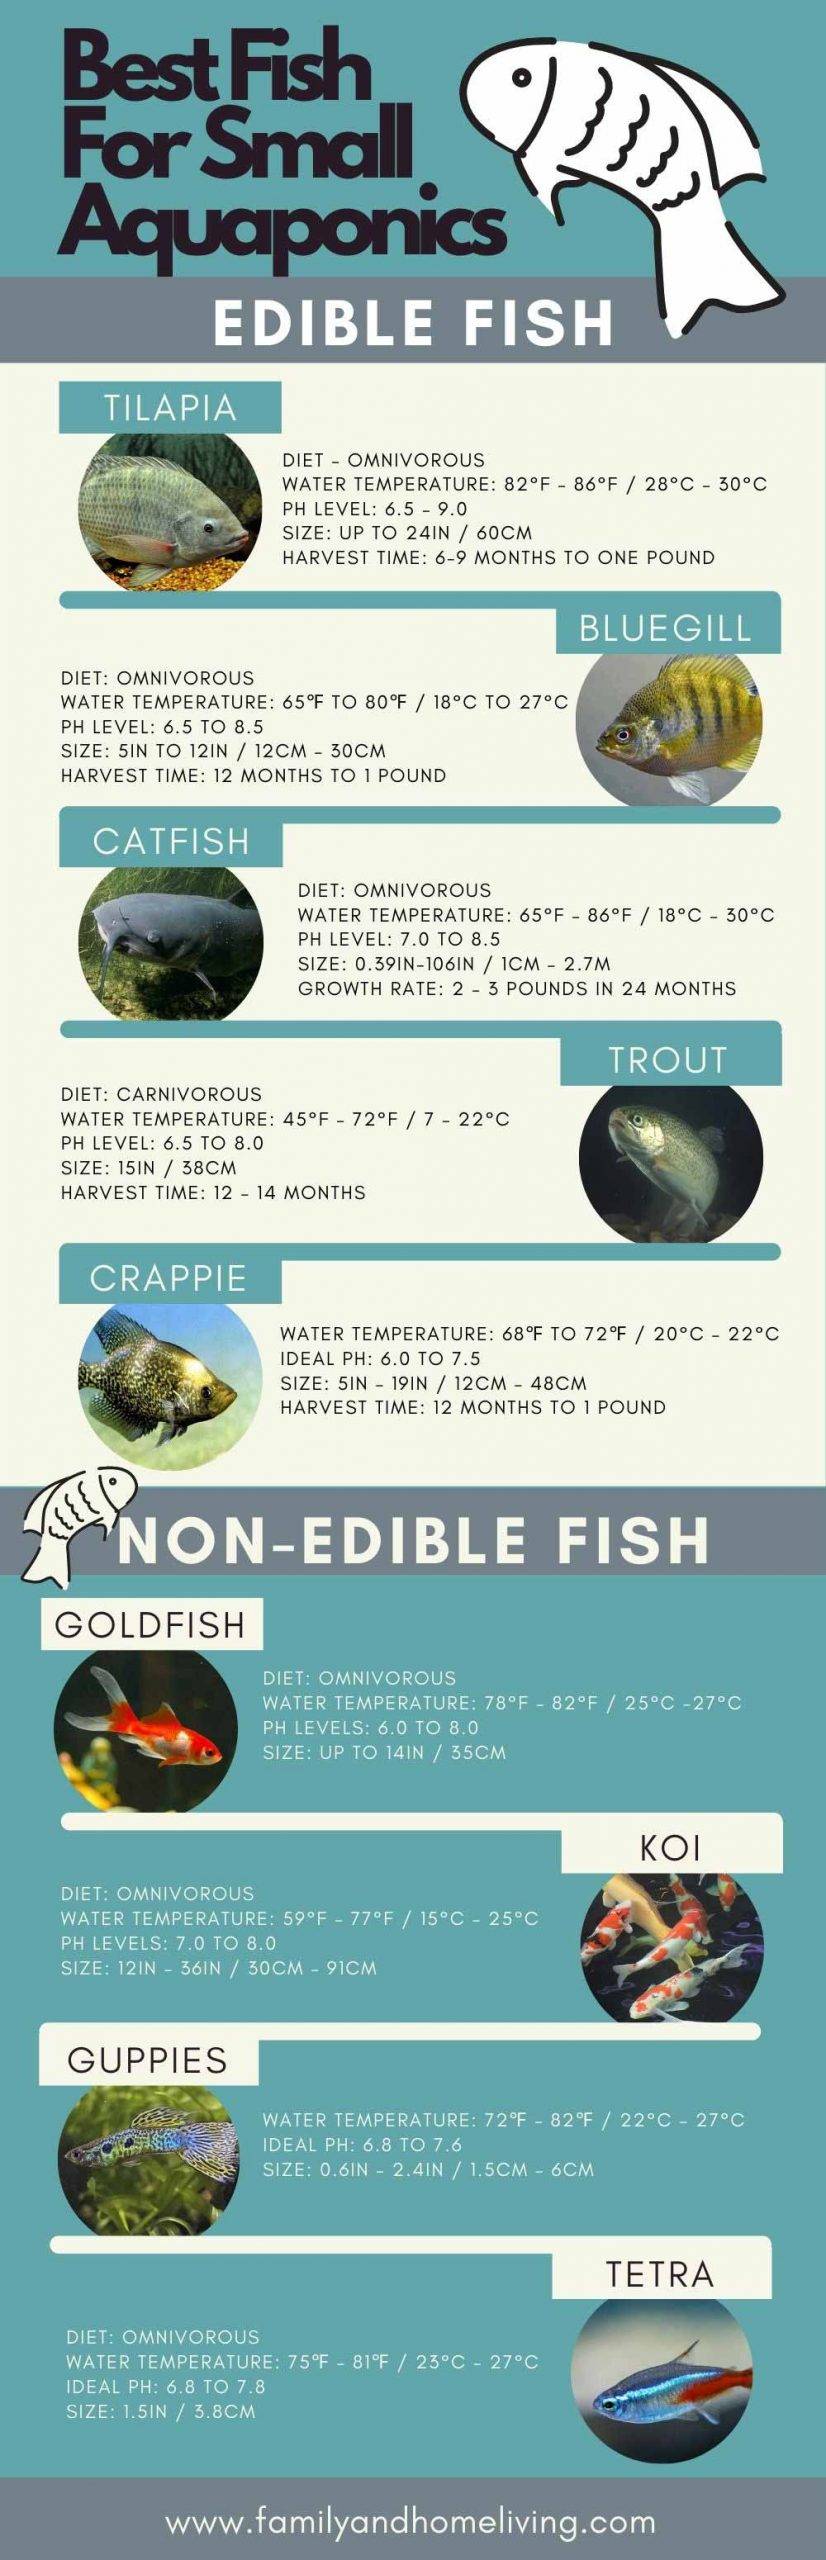 Infographic - The Best Fish For Small Aquaponics Systems - Edible and Non-Edible Fish